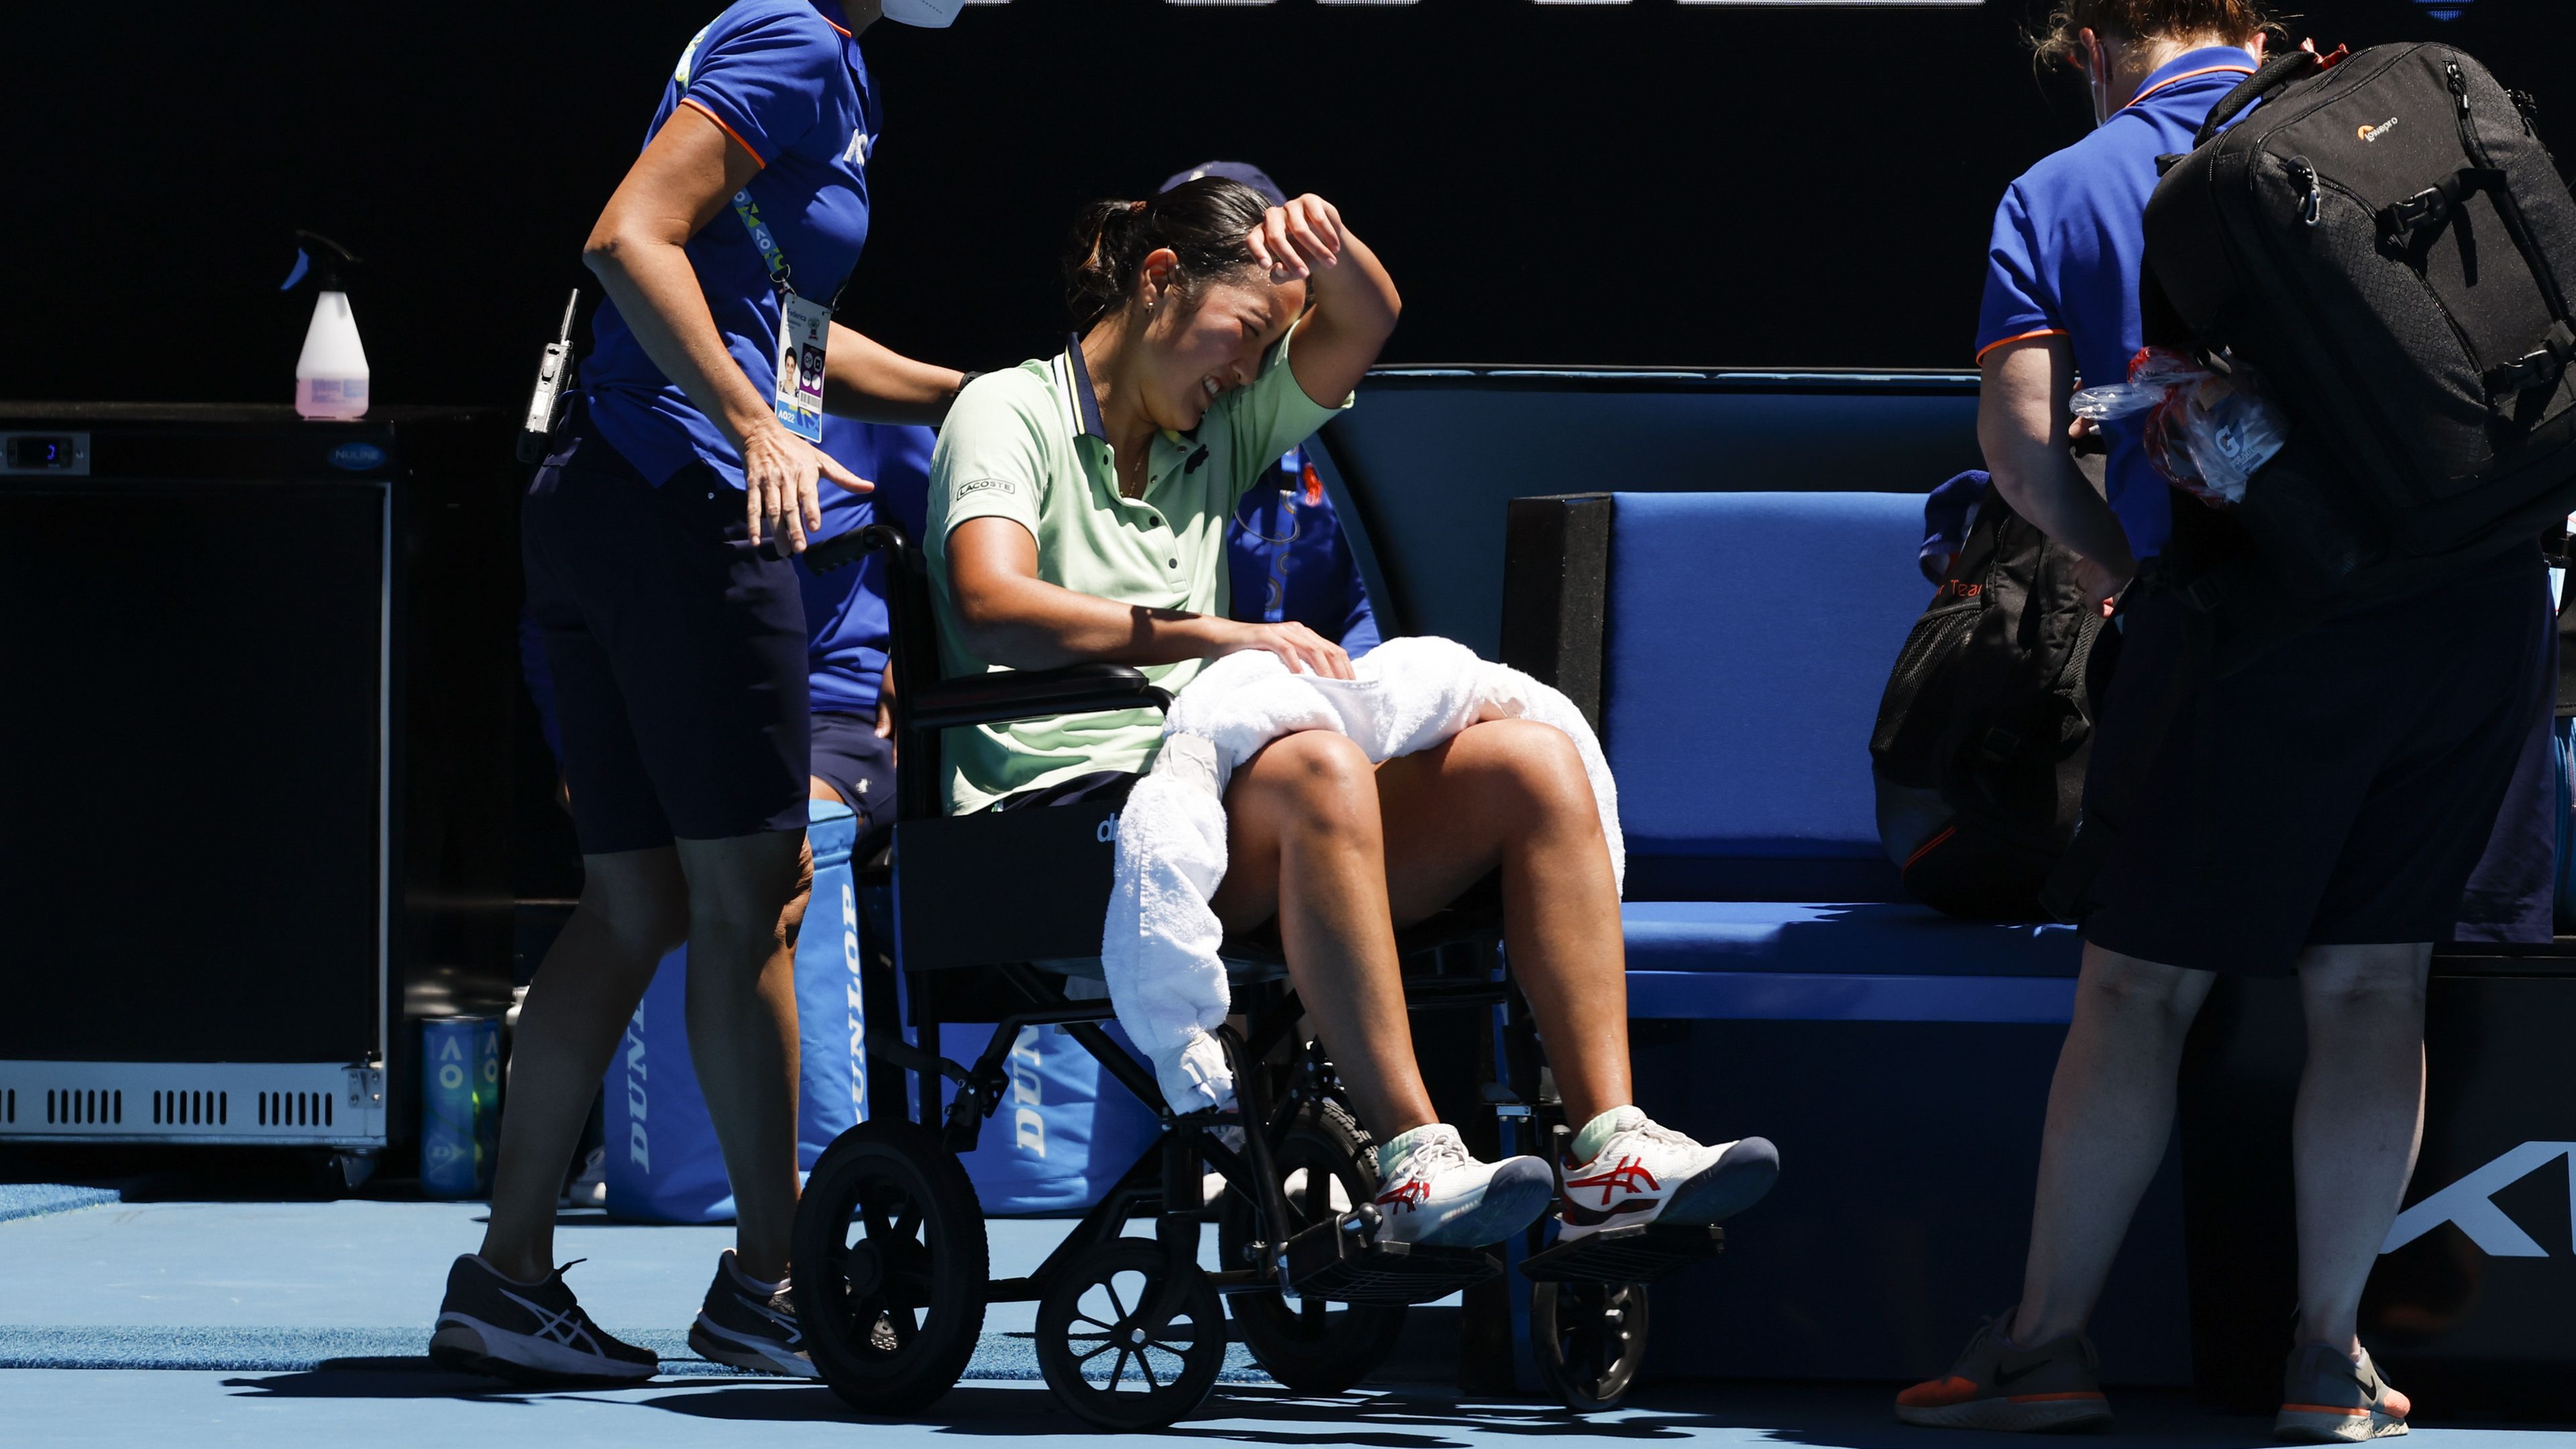 Heartbreak for Harmony Tan as she quits second round match and leaves court in wheelchair